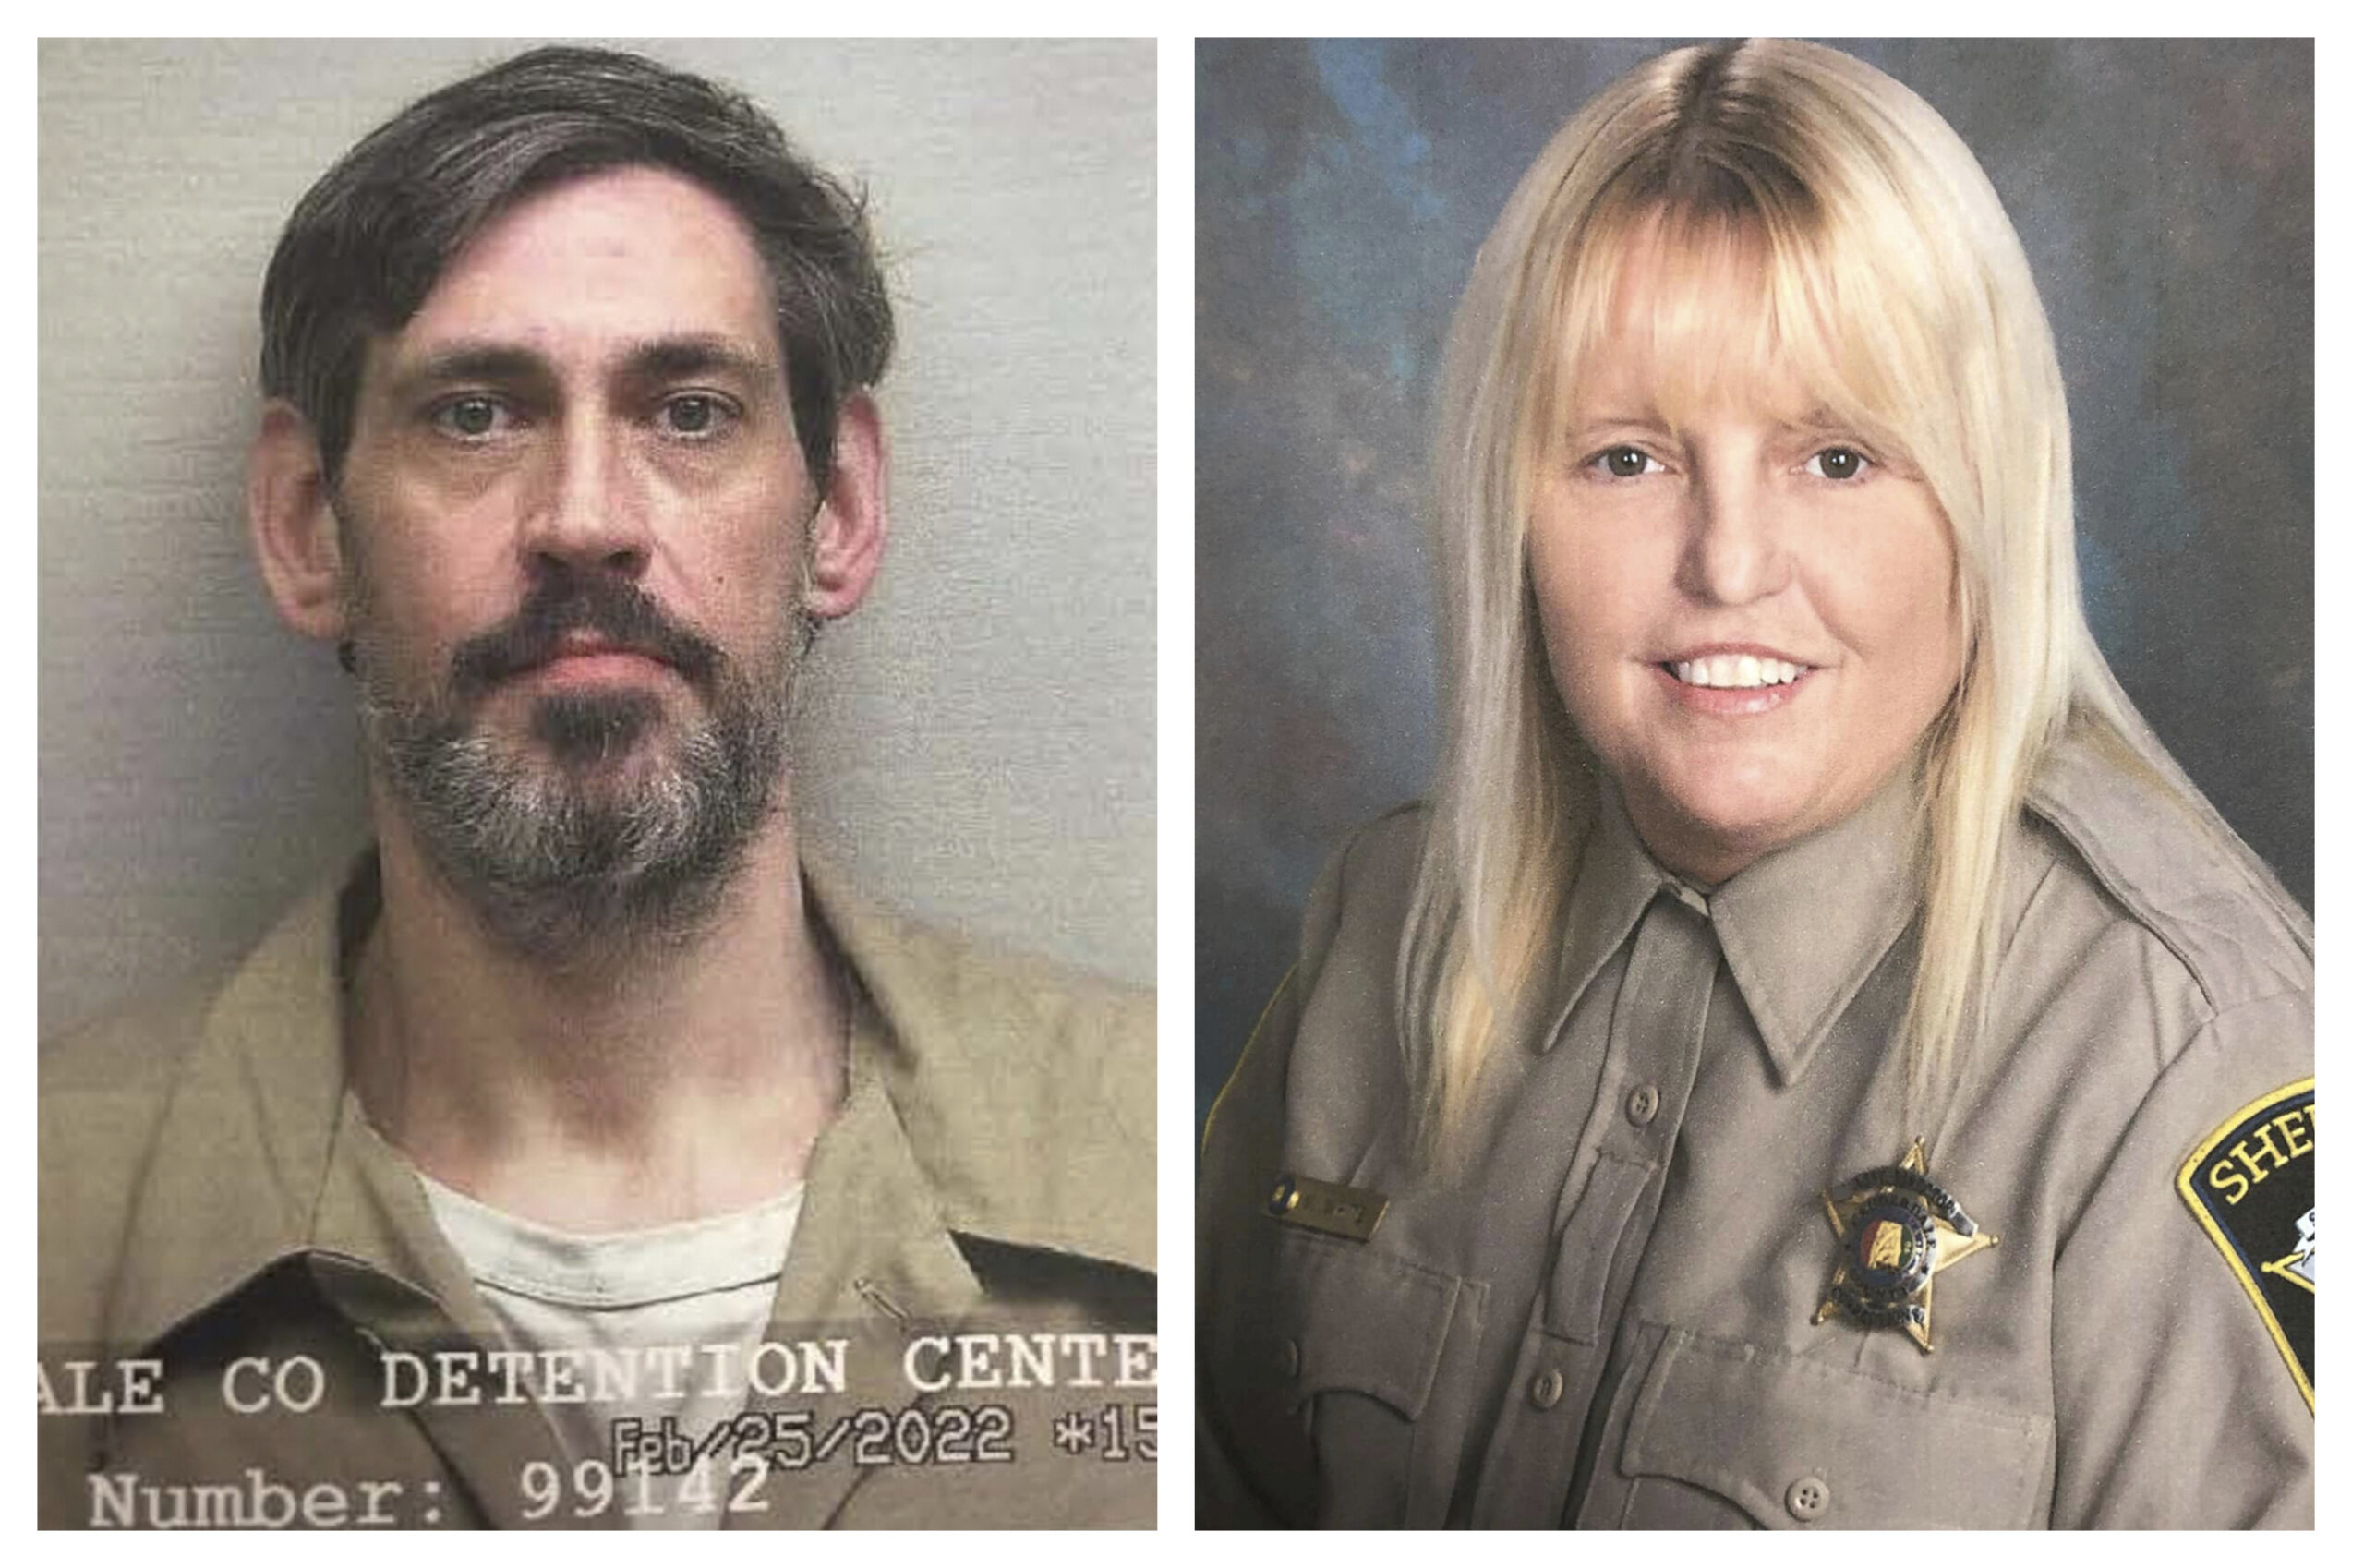 FILE - This combination of photos provided by the U.S. Marshals Service and Lauderdale County Sheriff's Office in April 2022 shows inmate Casey White, left, and Assistant Director of Corrections Vicky White. The former Alabama jail official on the run with the murder suspect she was accused of helping escape shot and killed herself Monday, May 9, as authorities caught up with the pair after more than a week of searching, officials said. The man she fled with surrendered. (U.S. Marshals Service, Lauderdale County Sheriff's Office via AP, File)